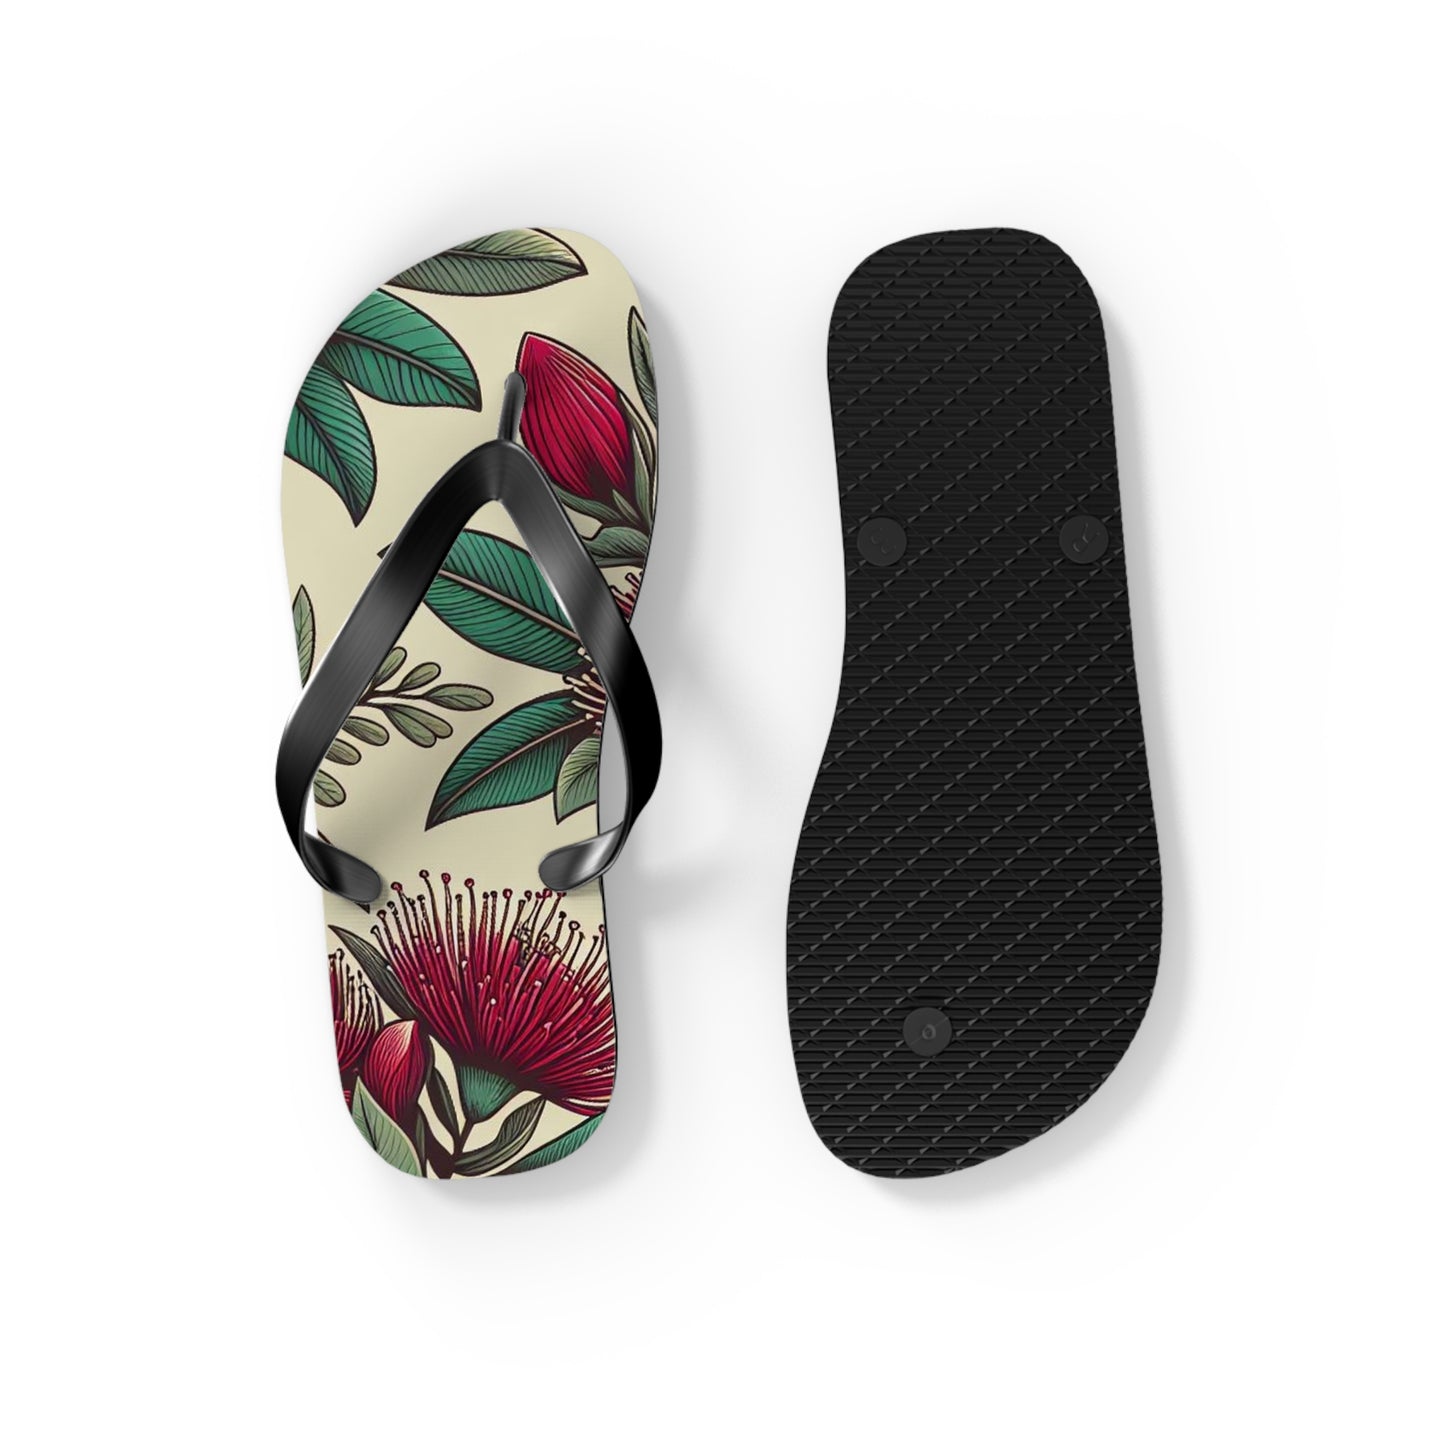 a pair of flip flops with flowers on them